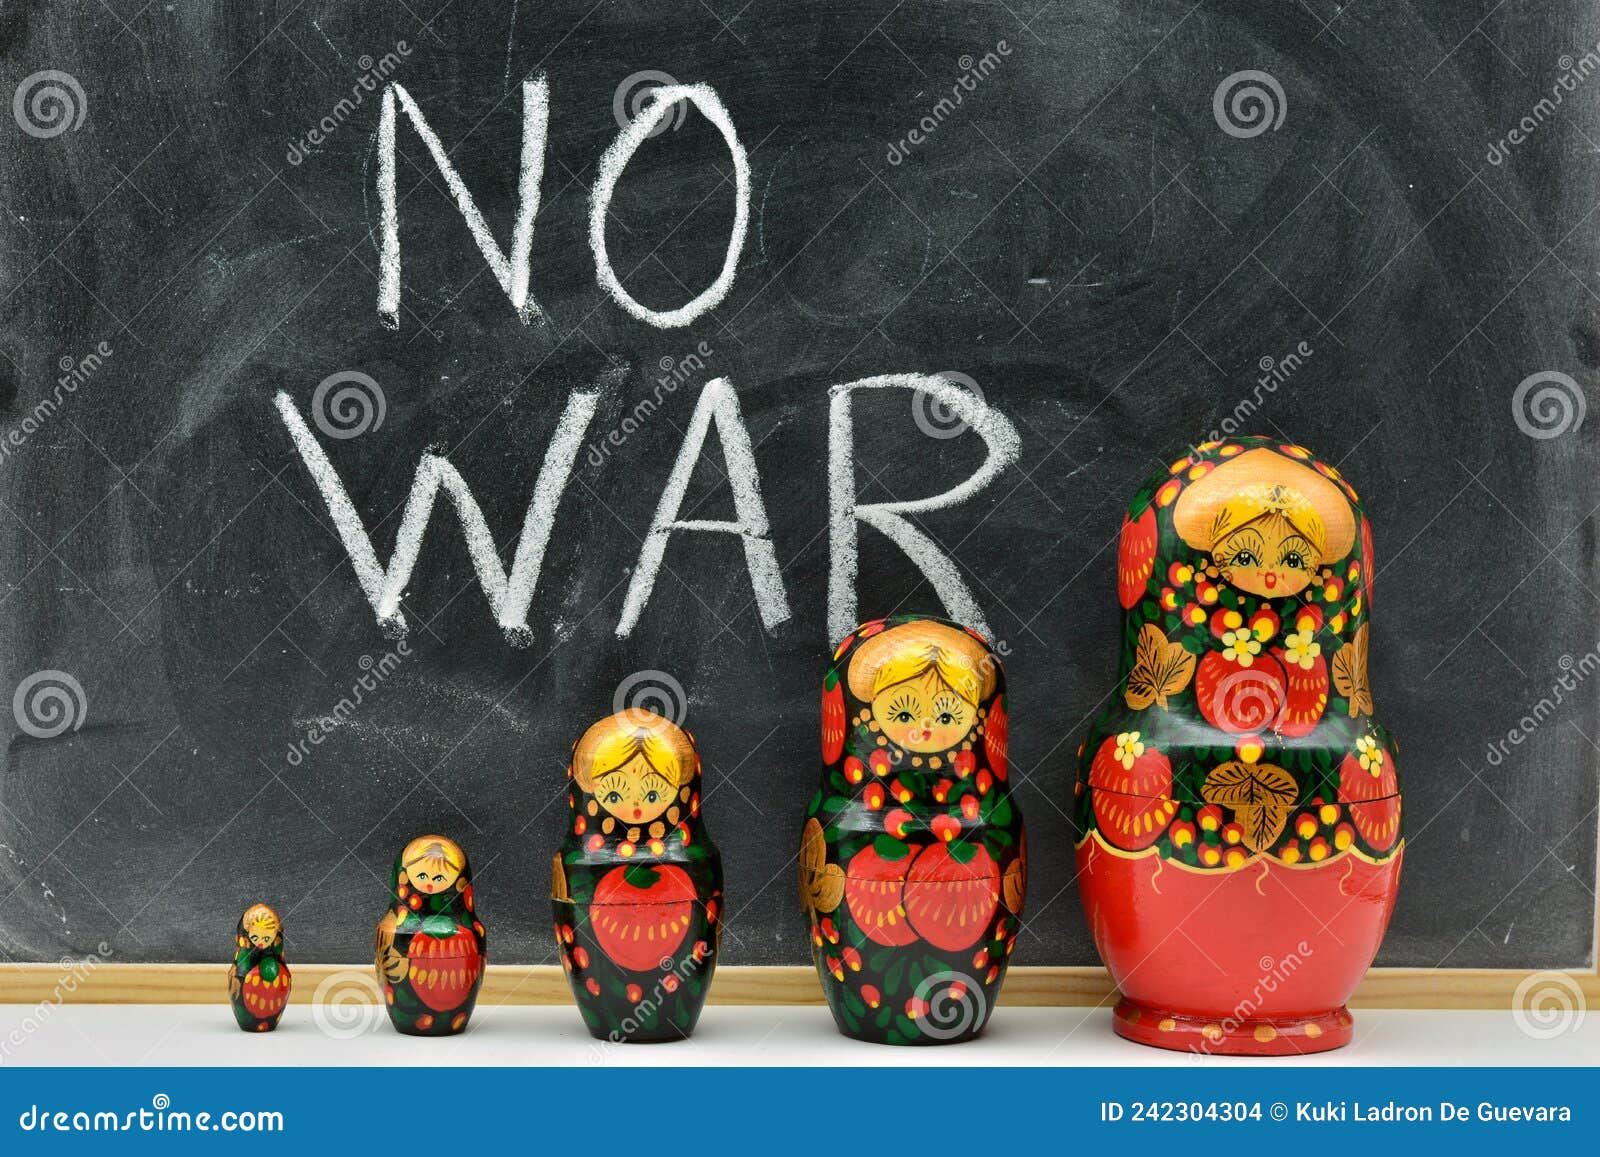 group of matryoshka dolls with the background of a blackboard